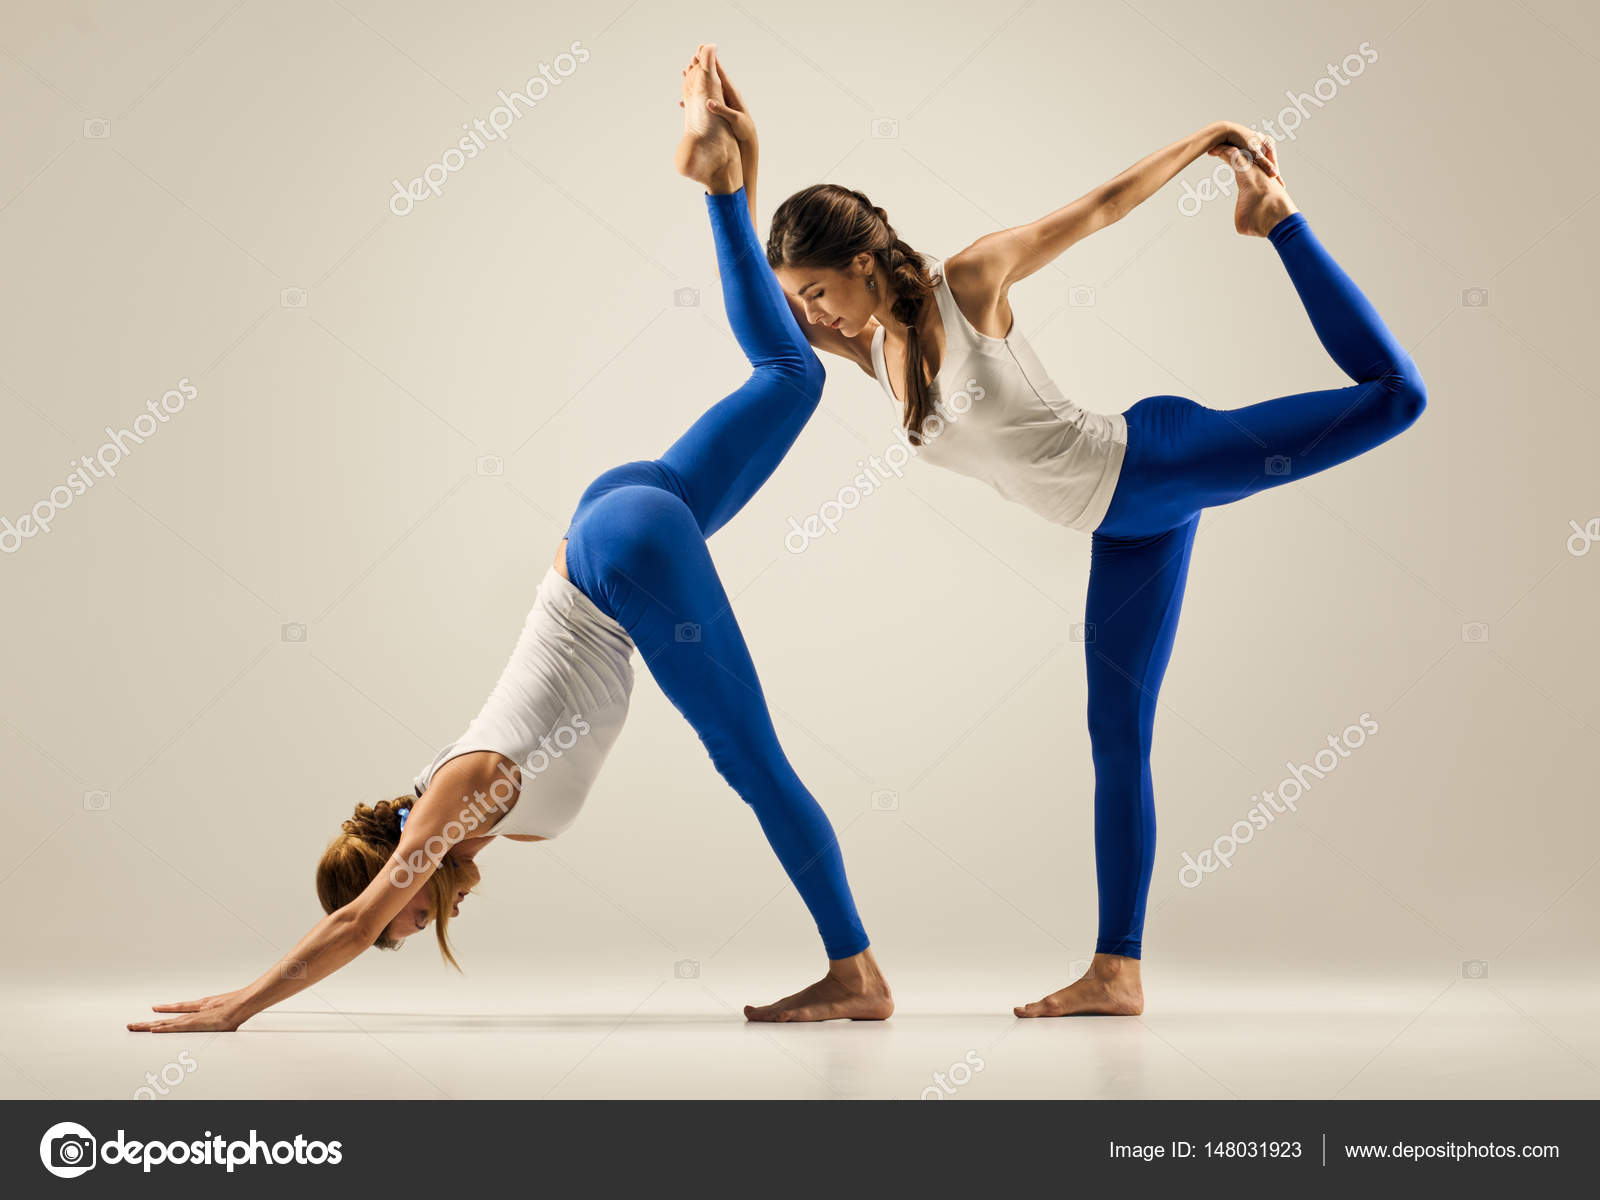 Yoga in Pair. Couple Women. Duo Pose Stock Photo - Image of nature, couple:  63662610, duo yoga poses - thirstymag.com